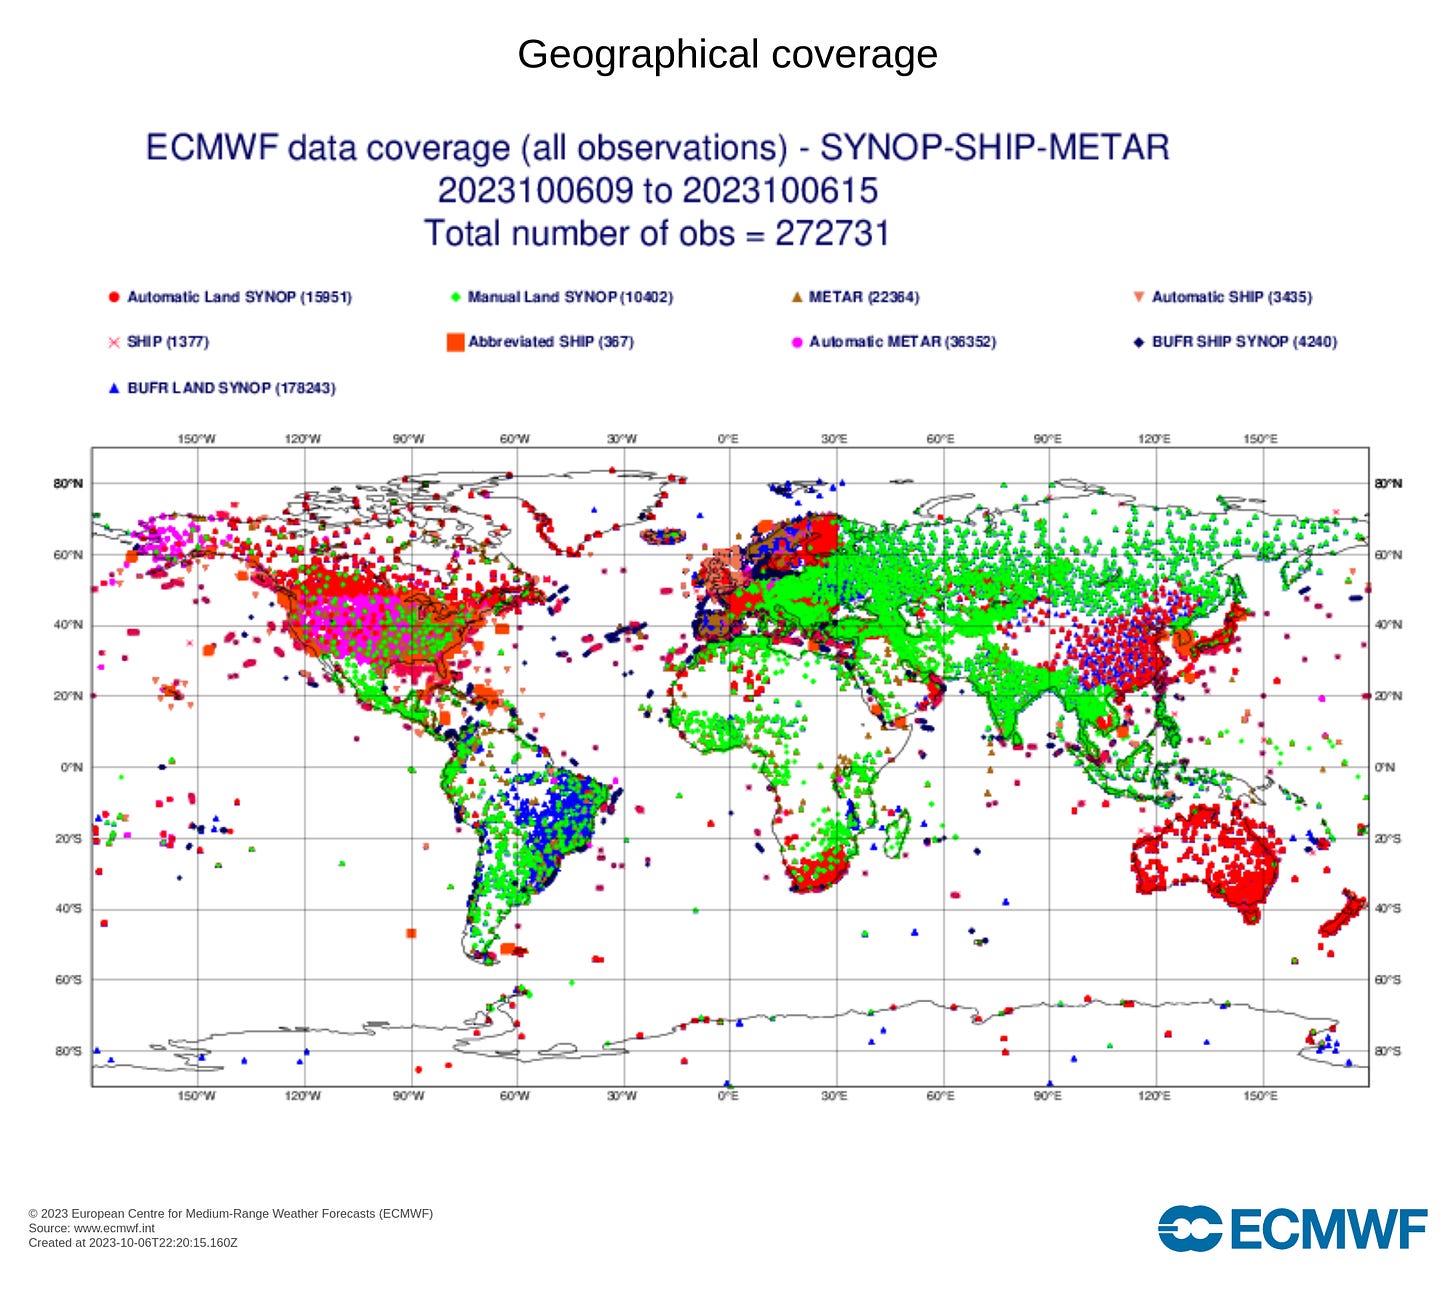 Geographical coverage of the ECMWF observation system for October 6, 2023. There are hundreds of dots scattered around the globe.